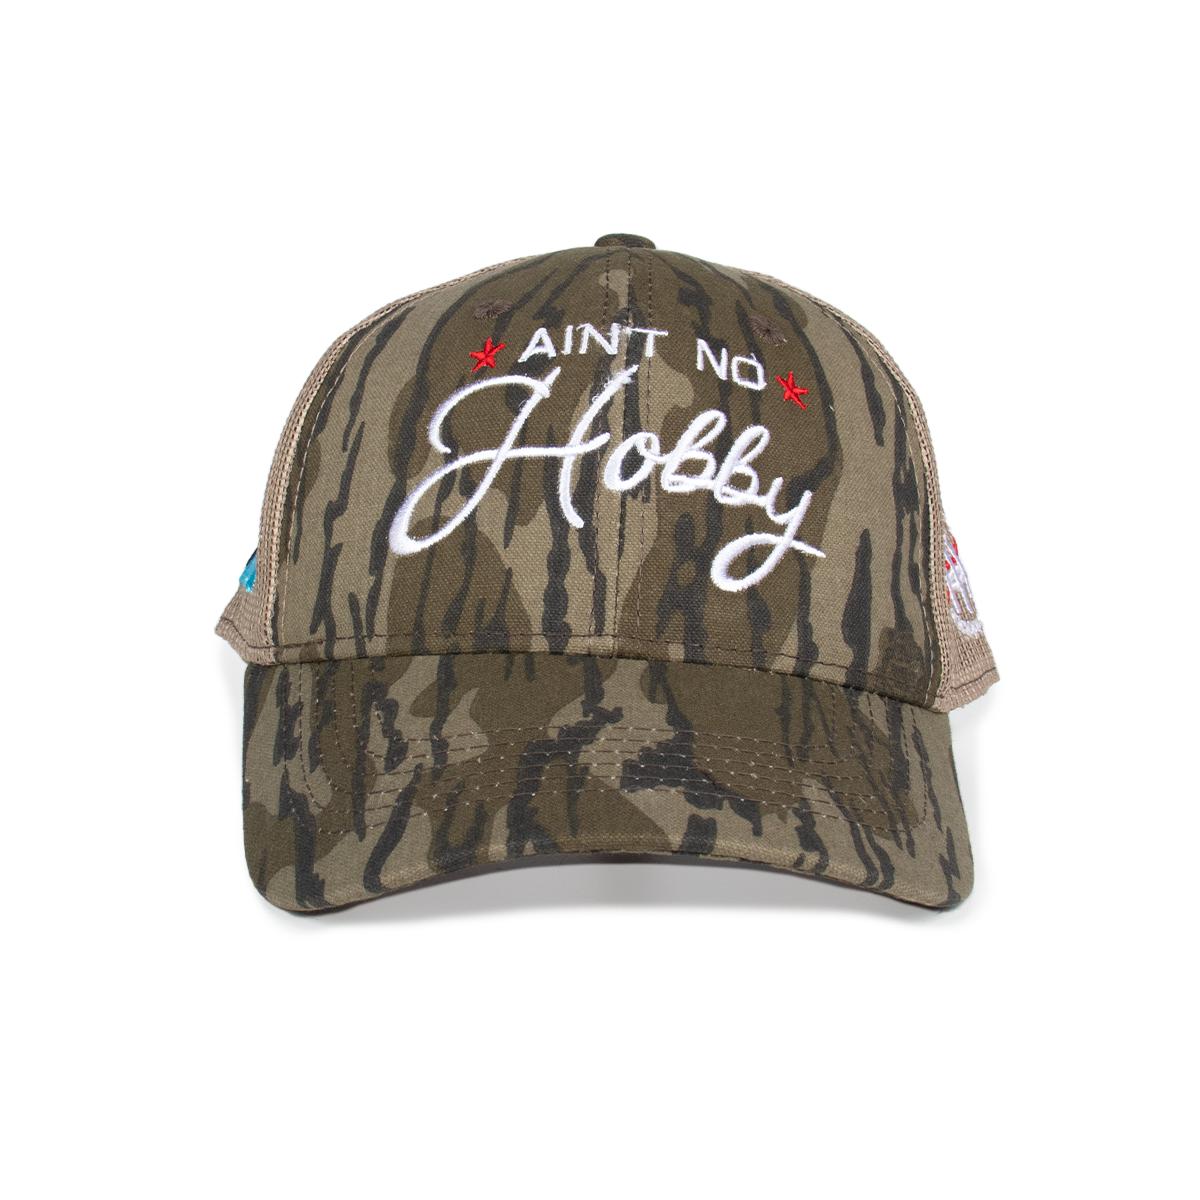 Ain't No Hobby x Mossy Oak Mesh Trucker Hat-Hats-Fore Play-White-One Size-Barstool Sports